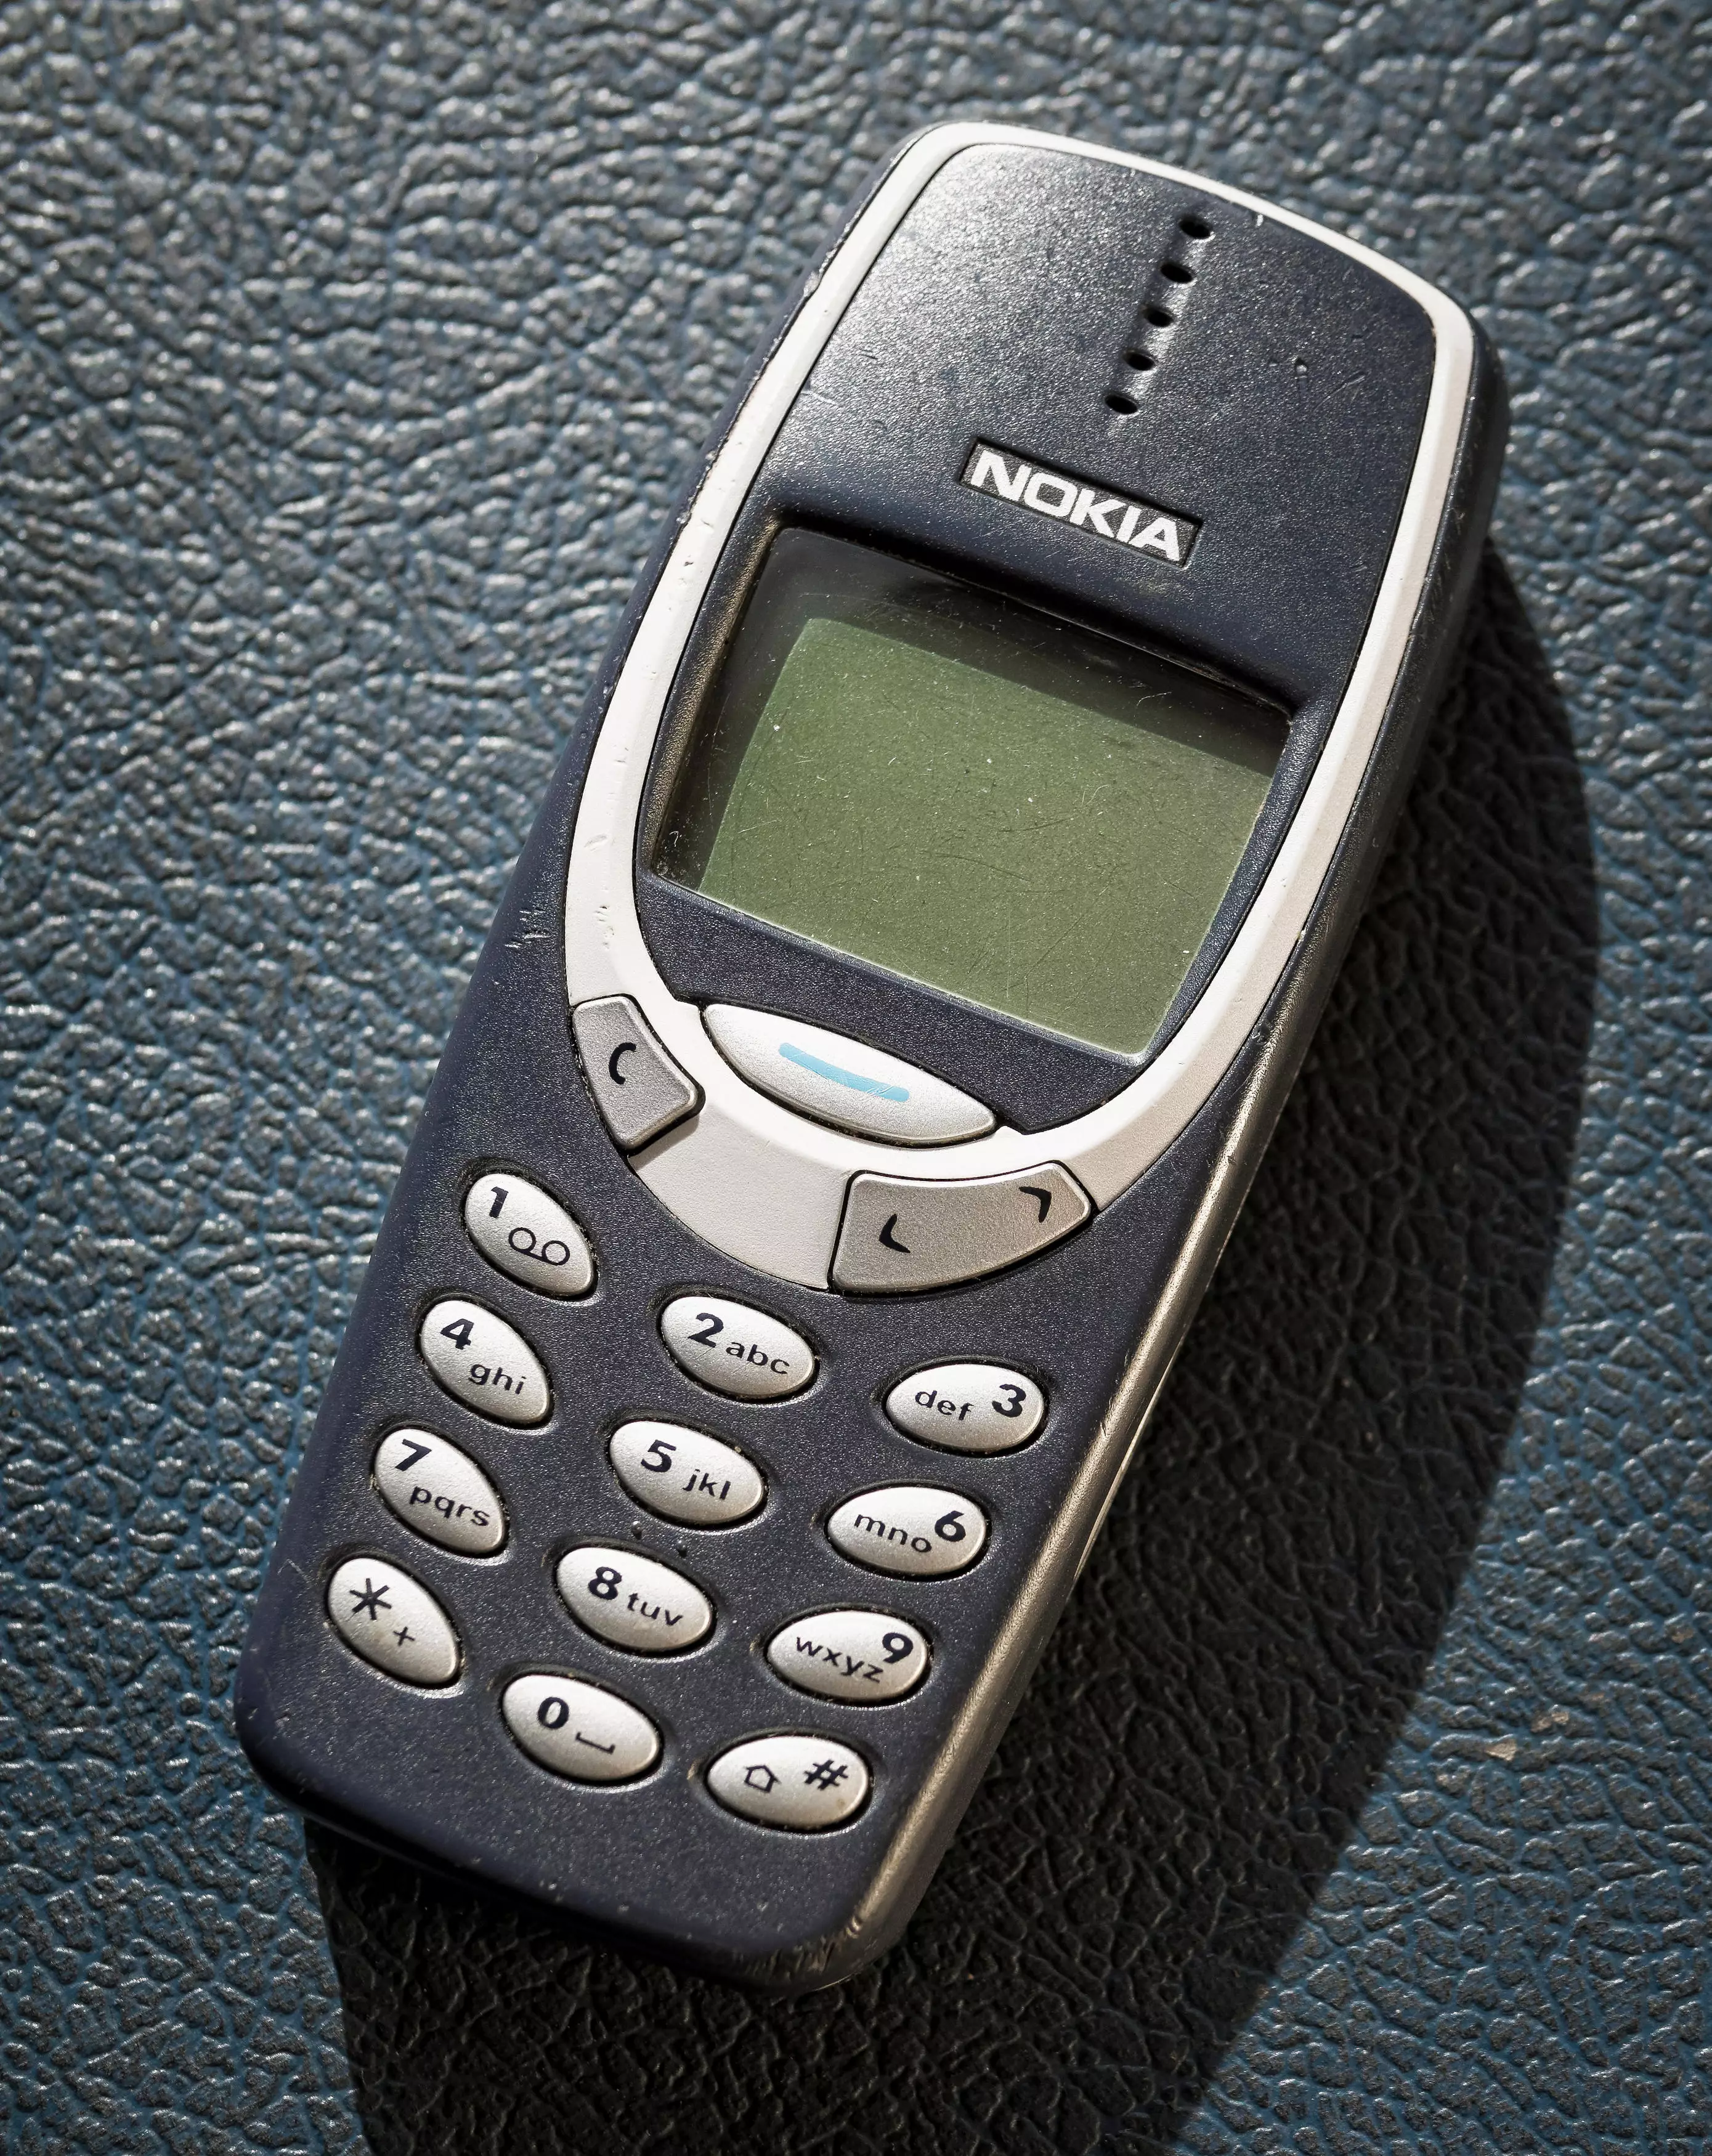 The Nokia 3310 Blue from the year 2000.